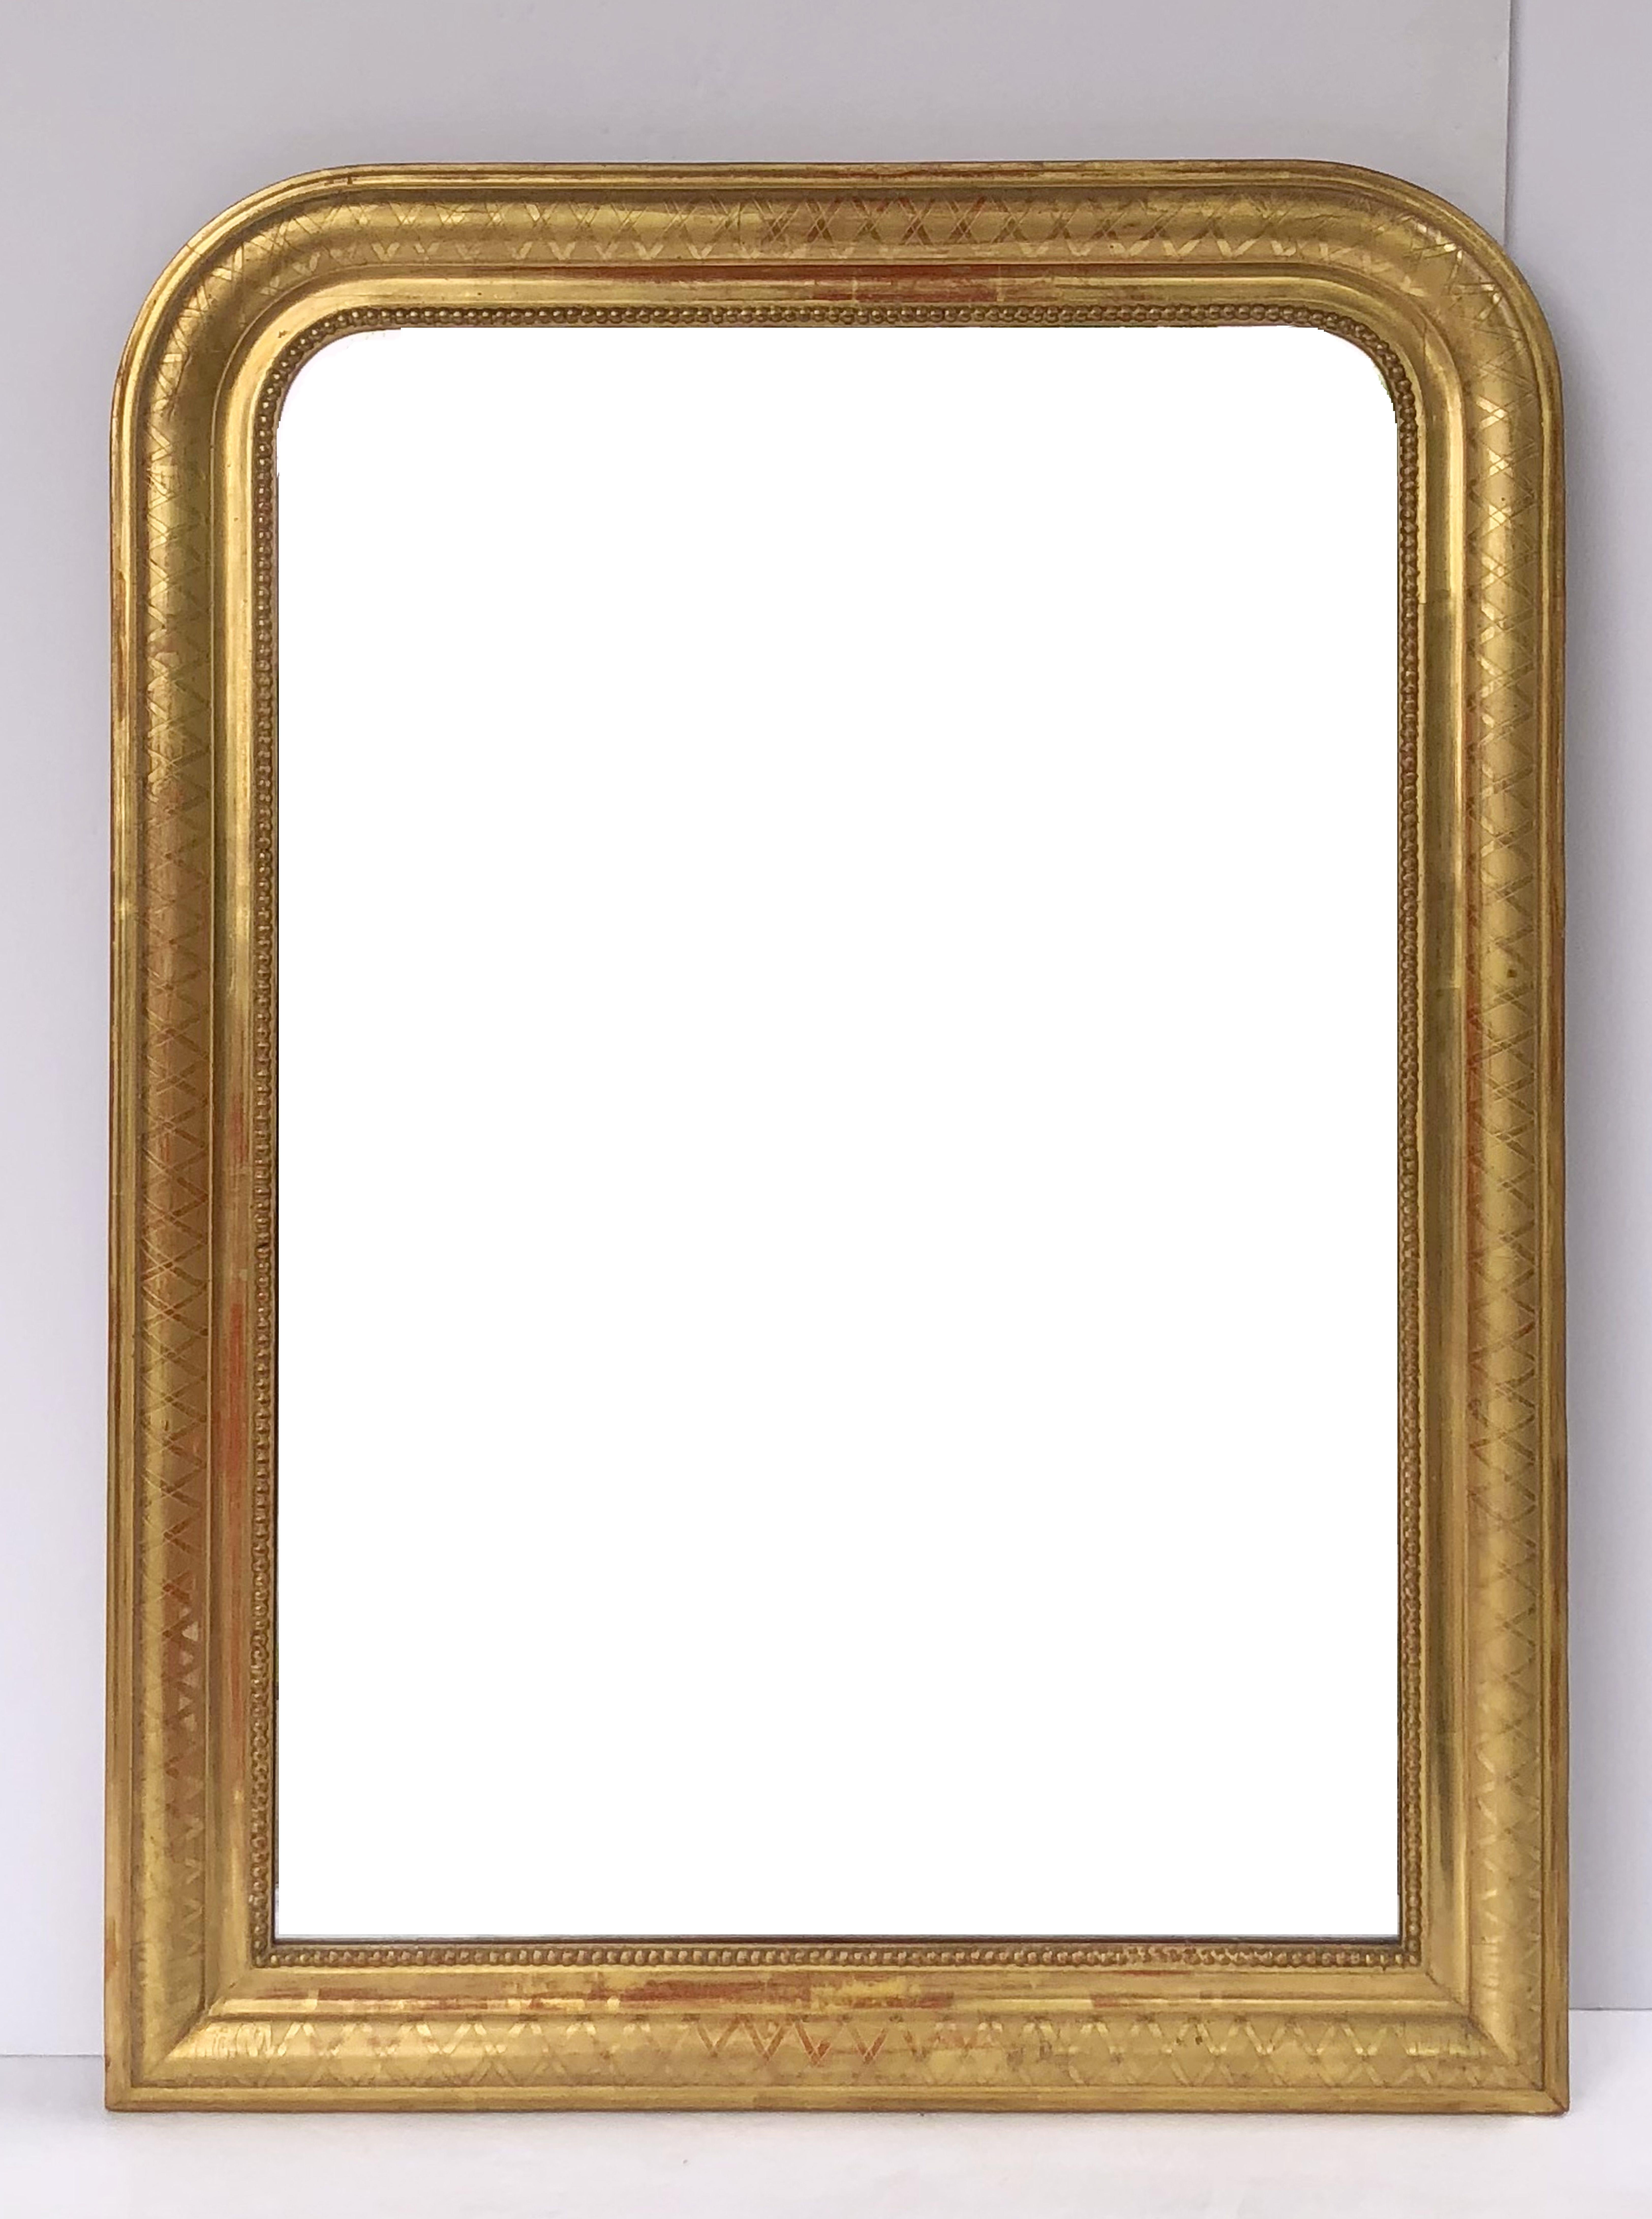 A fine Louis Philippe wall mirror from France, featuring a moulded surround with a beautiful patinated gold-leaf.

Dimensions: H 42.75 inches x W 32 inches

Other sizes available in this style
   